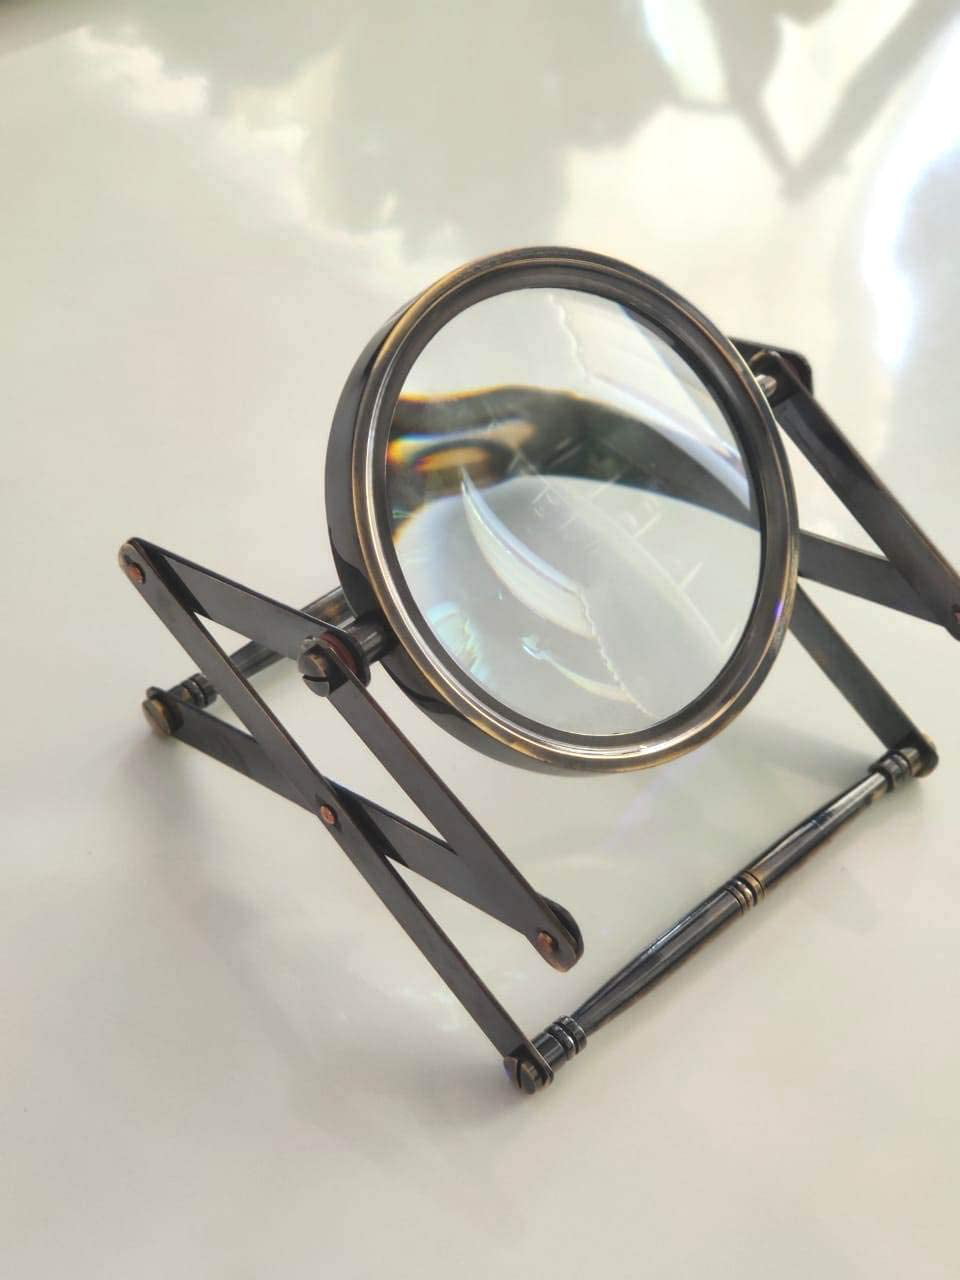 Magnifying Reading Glass W Stand Nautical Vintage Brass Table Marine Magnifier 